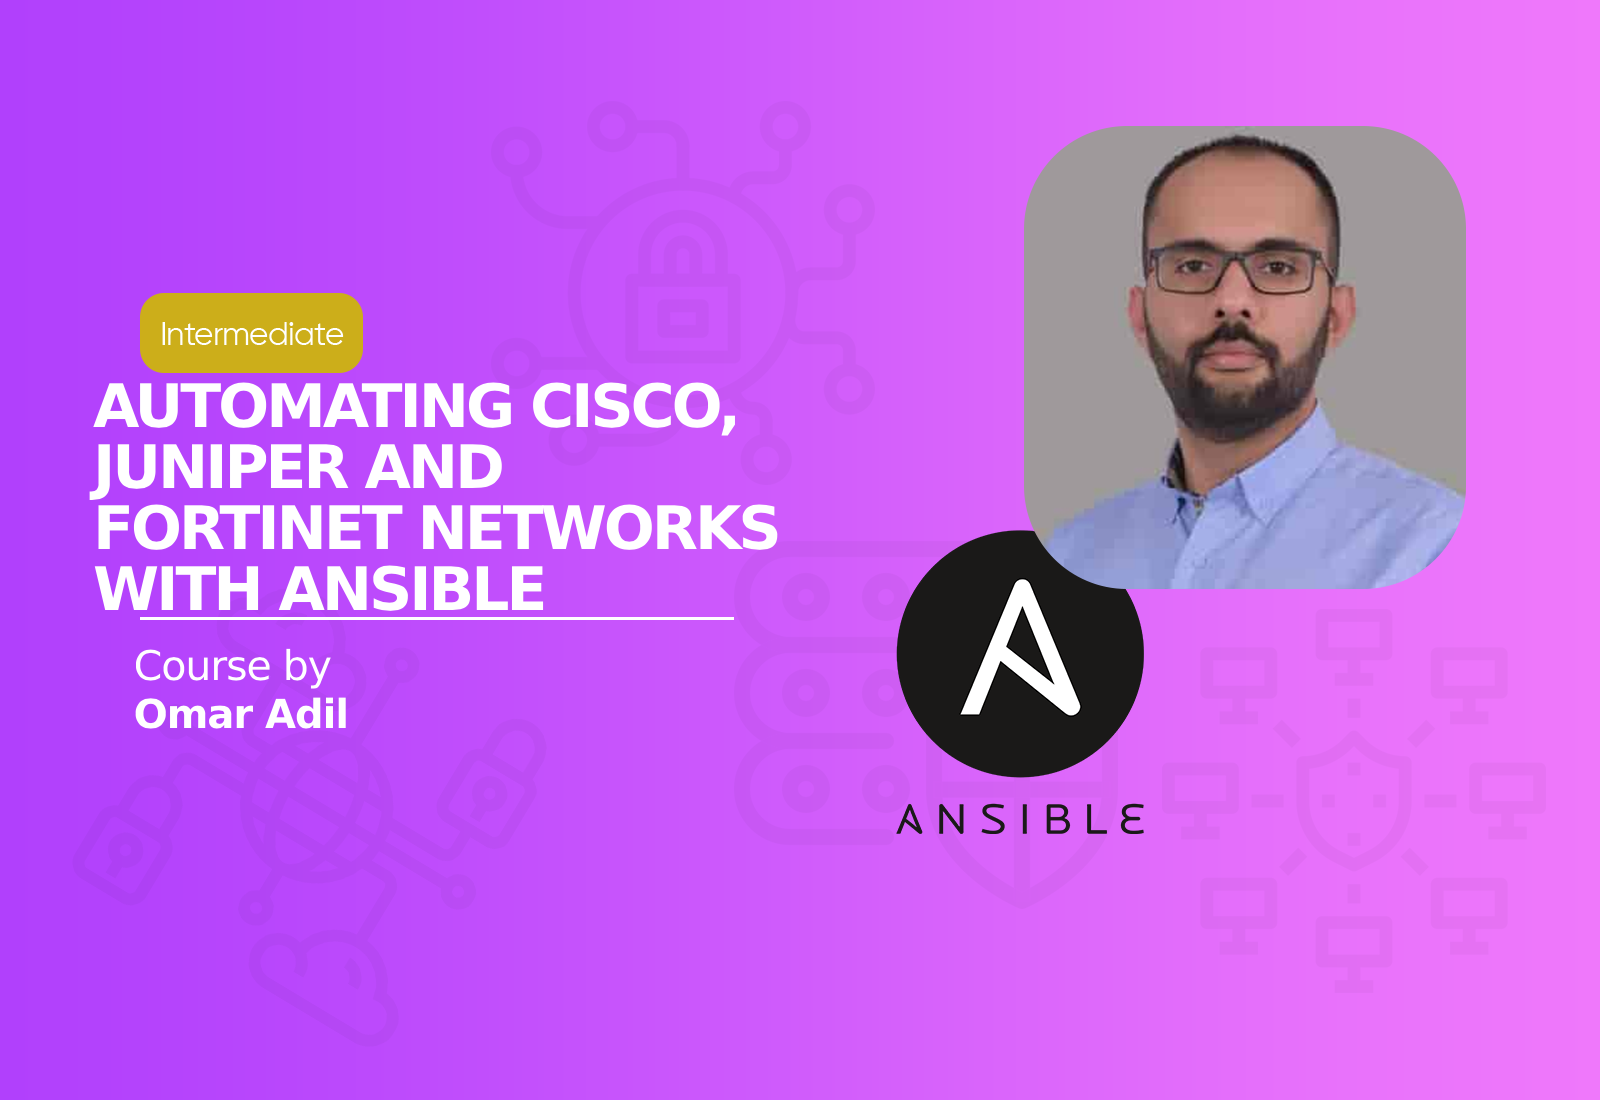 Automating Cisco, Juniper and Fortinet Networks with Ansible